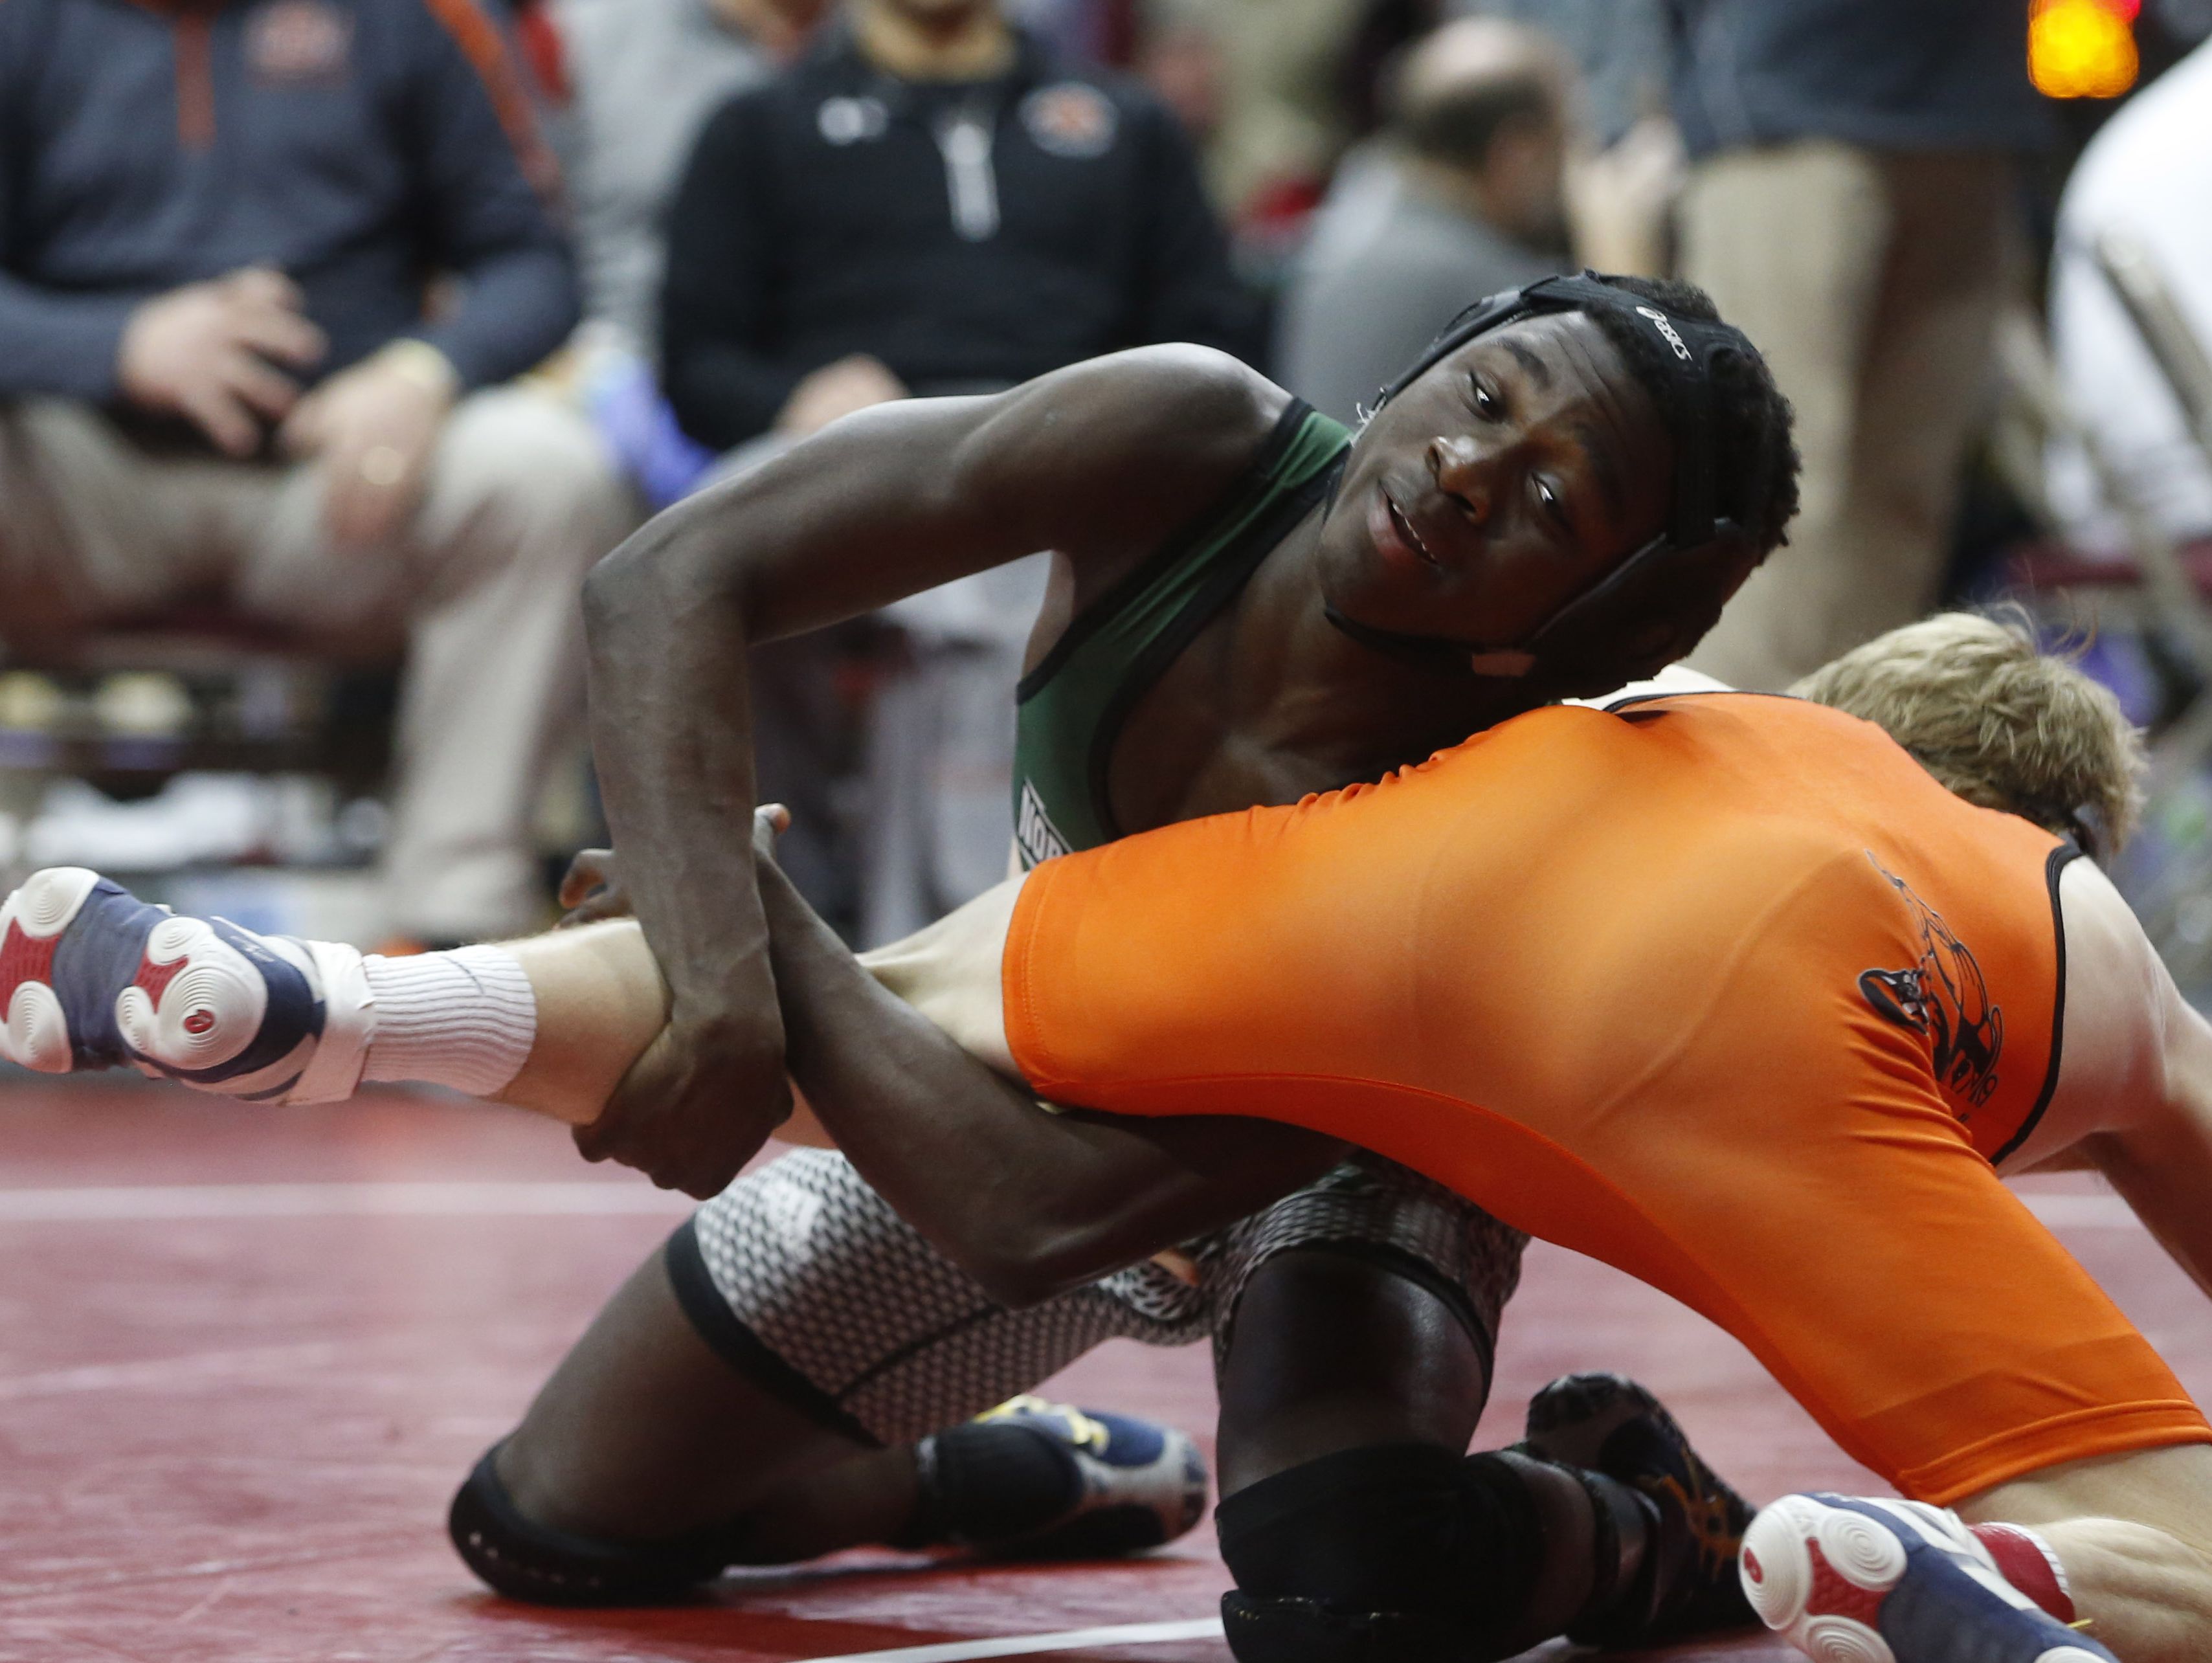 Shadrach Zarwie, left, of Des Moines North/Hoover wrestles Council Bluffs Thomas Jefferson's McGwire Midkiff in a Class 3A 126-pound match Thursday.